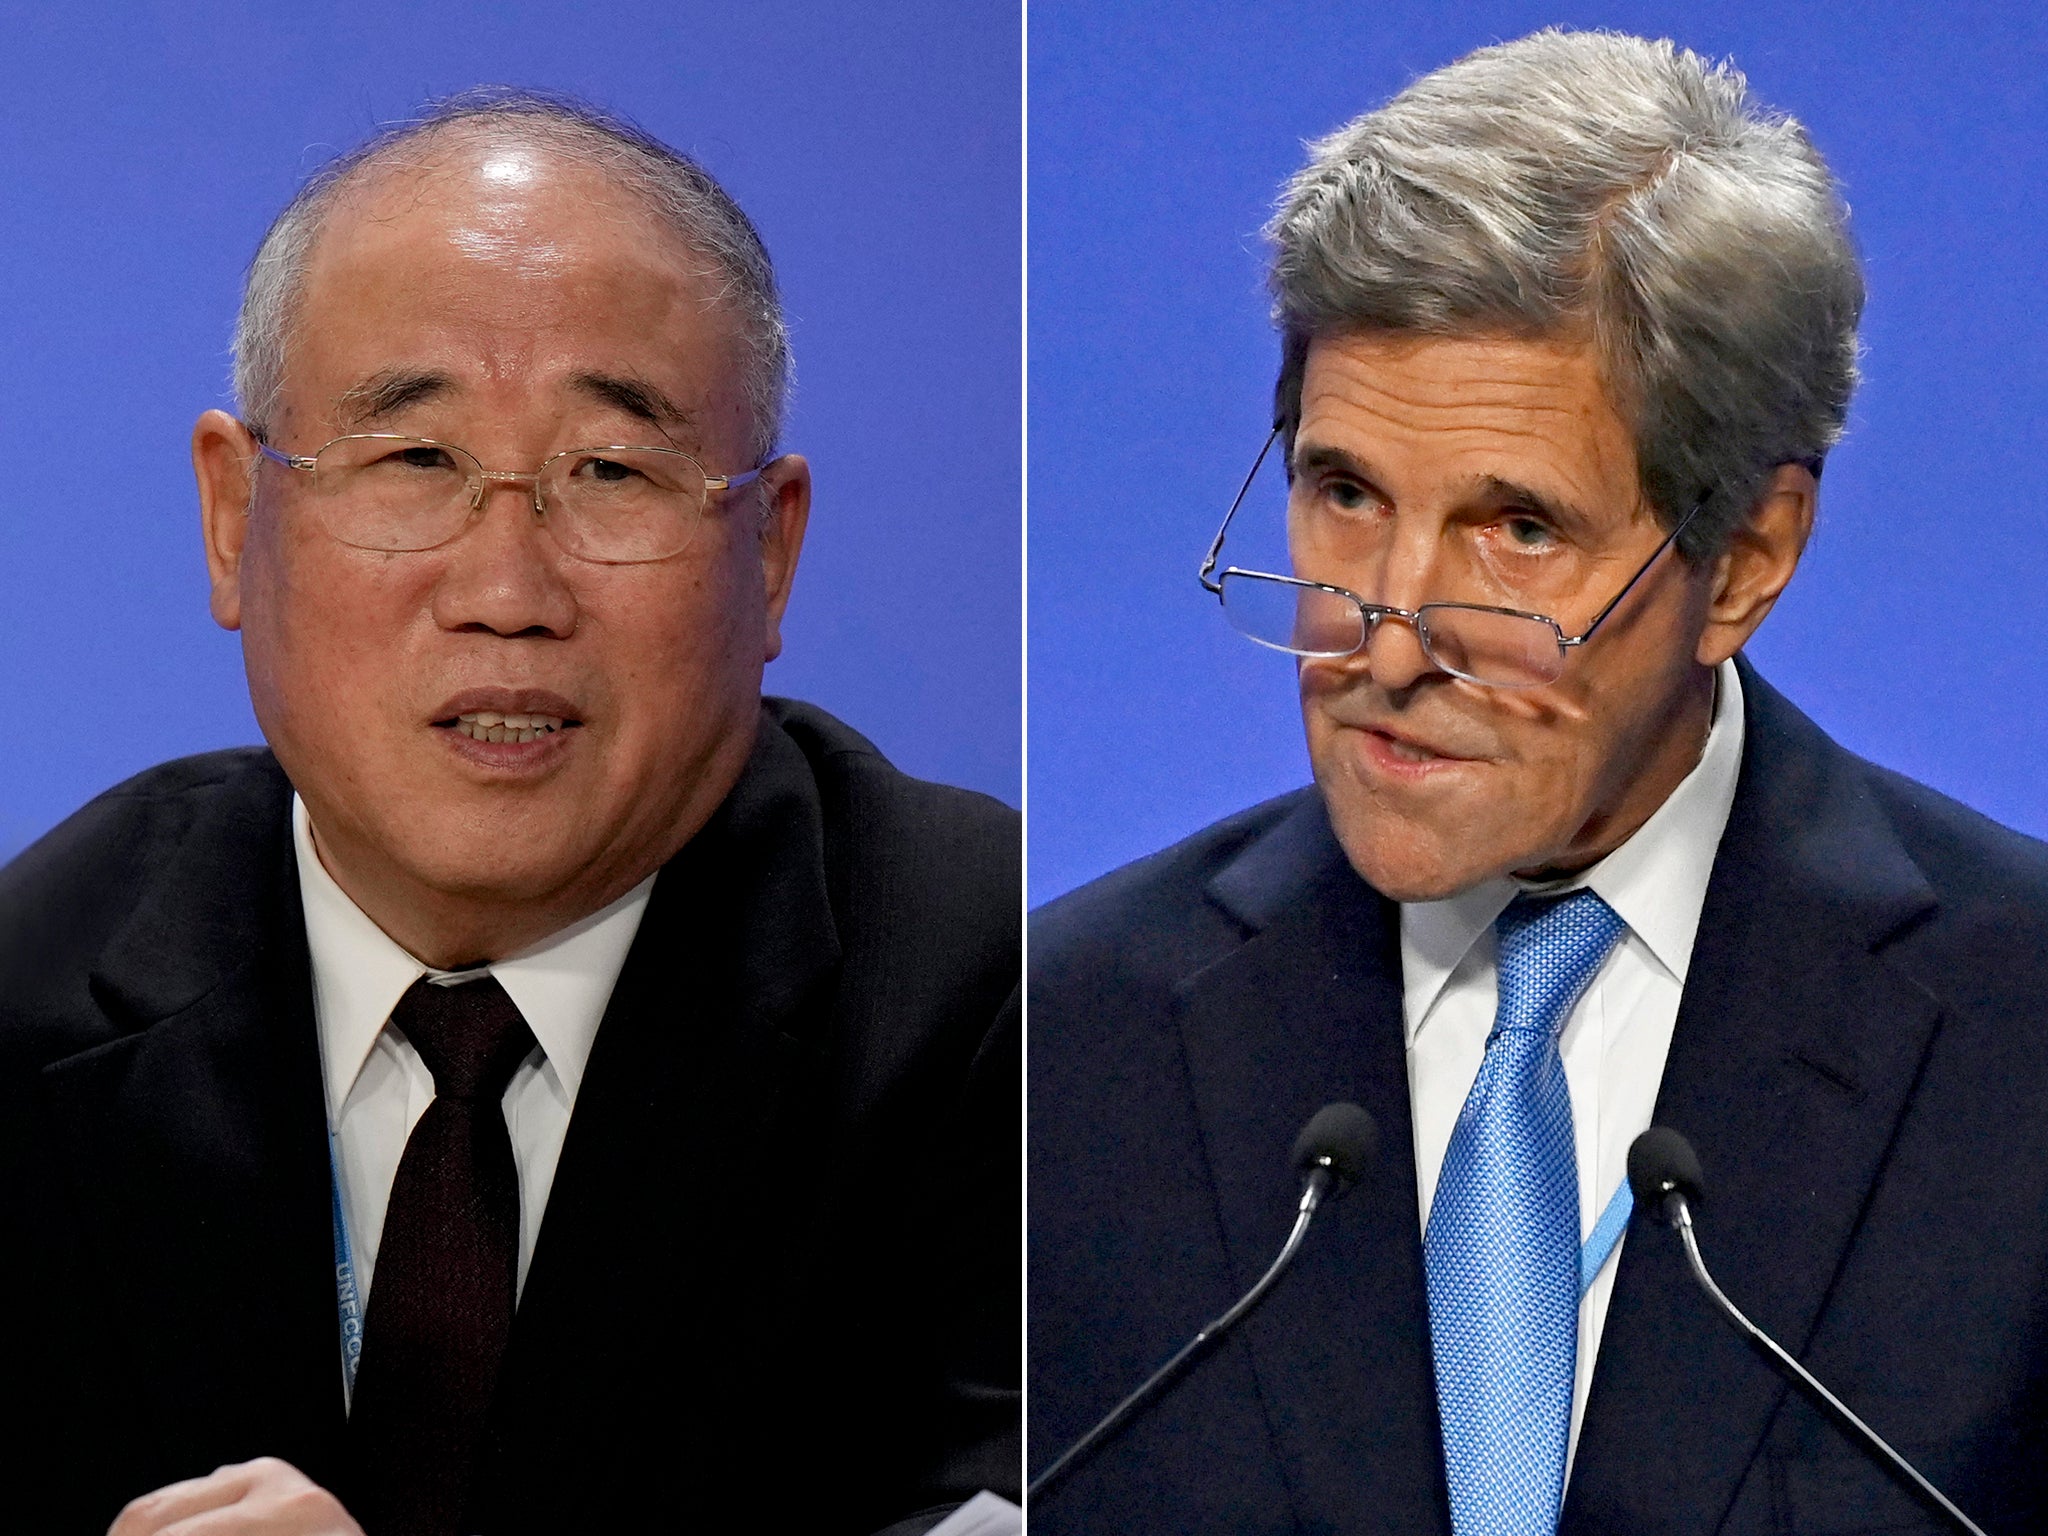 Xie Zhenhua and John Kerry also played a significant role in the Paris Agreement